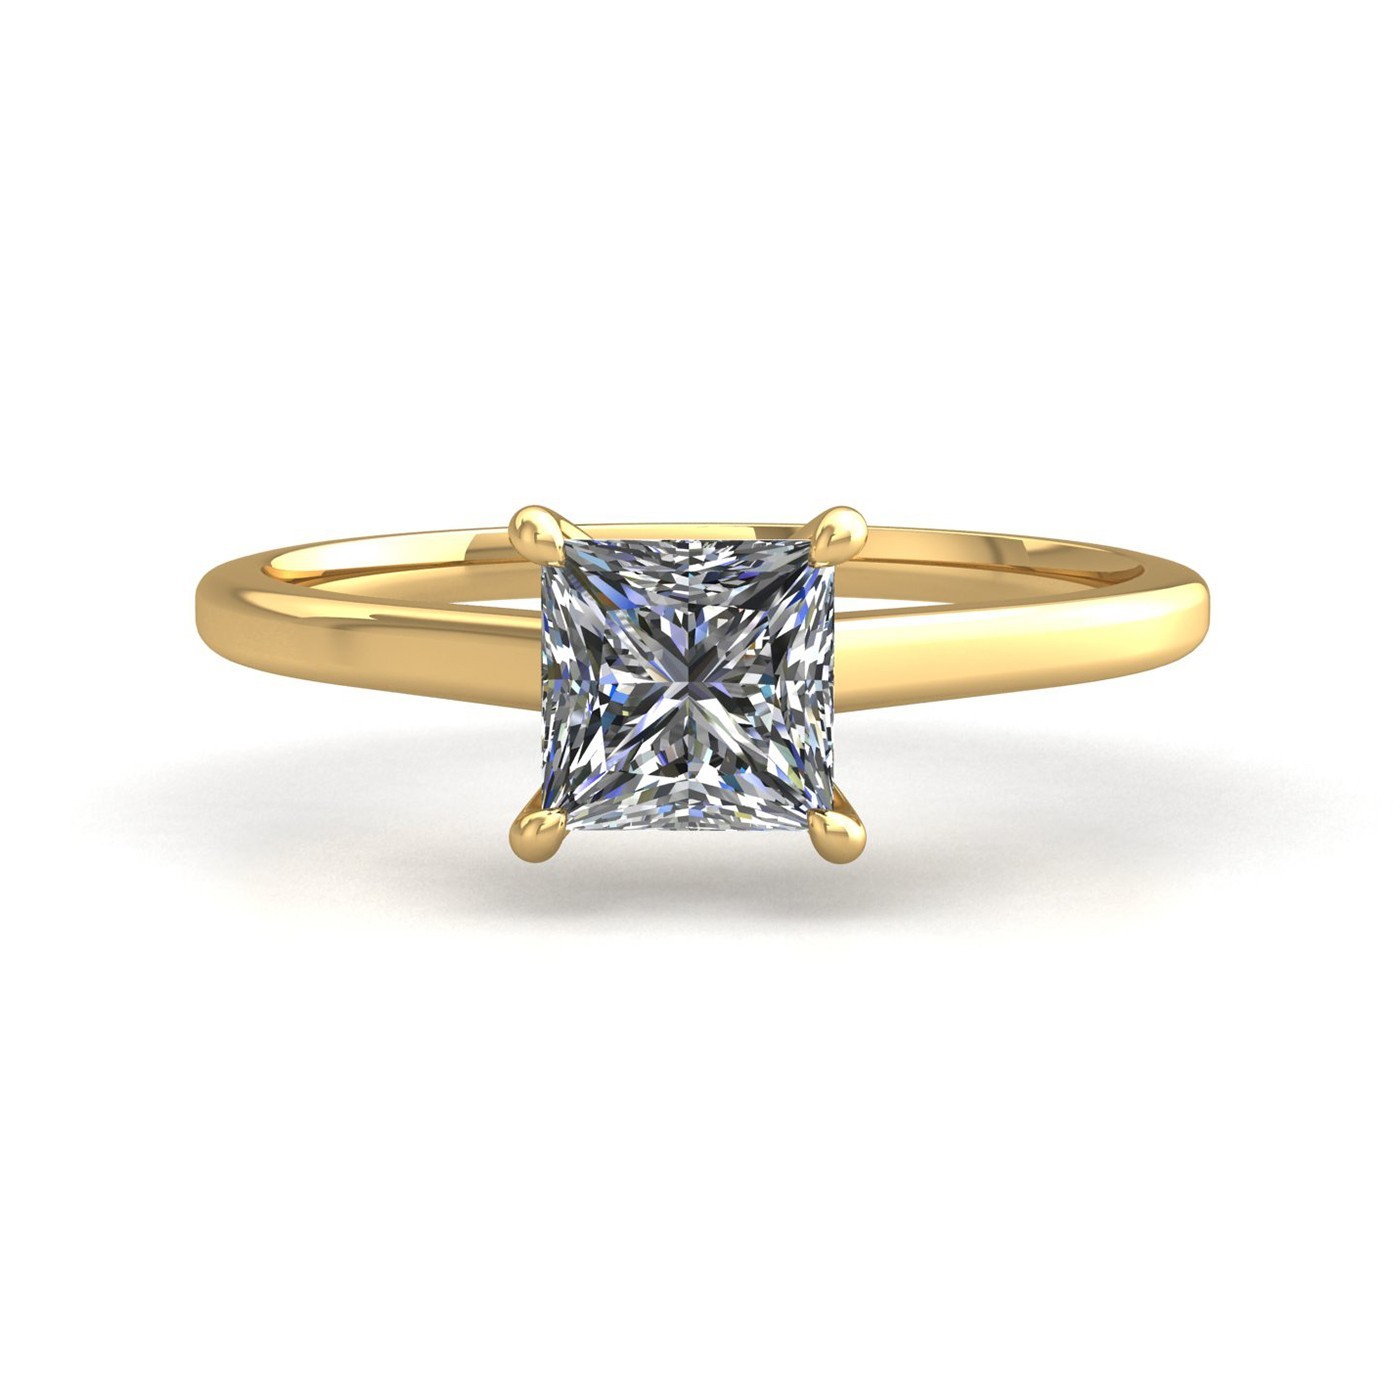 18k yellow gold  1,50 ct 4 prongs solitaire princess cut diamond engagement ring with whisper thin band Photos & images